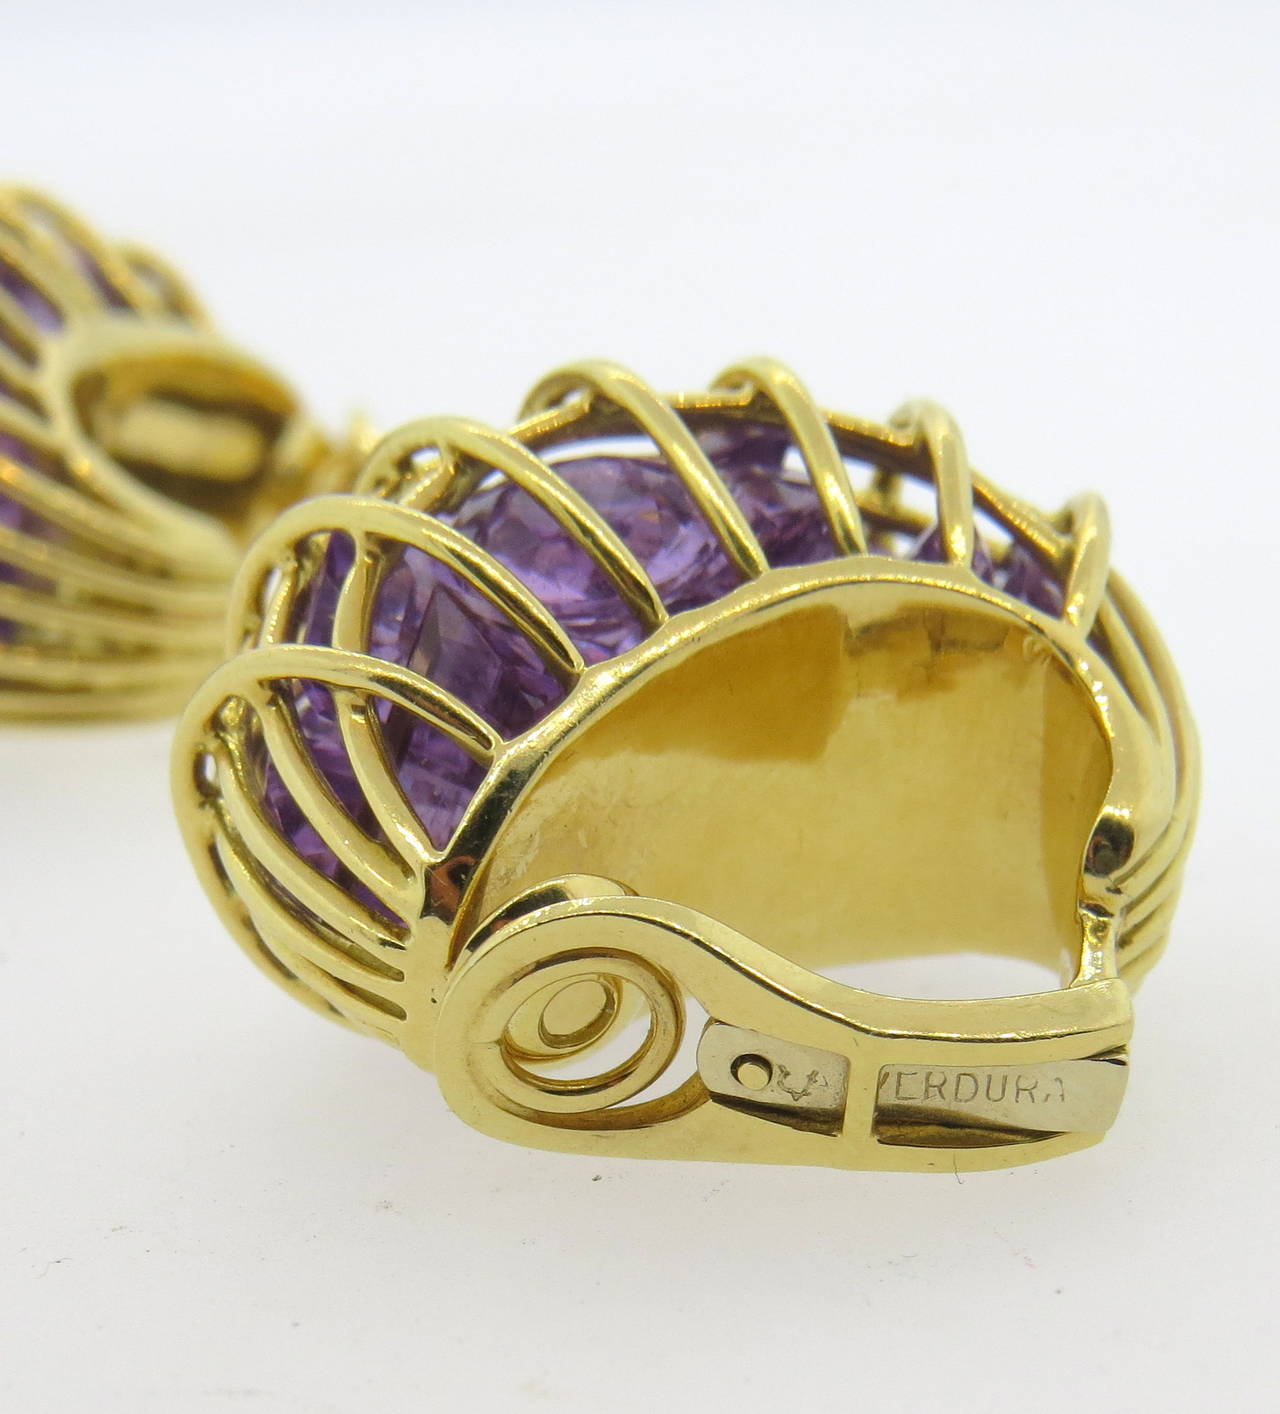 Impressive 18k gold Cage earrings, set with fancy cut loose amethyst stones, set in a caged gold design. Earrings are 27mm x 20mm. Marked Verdura. Weight - 37.8 grams.